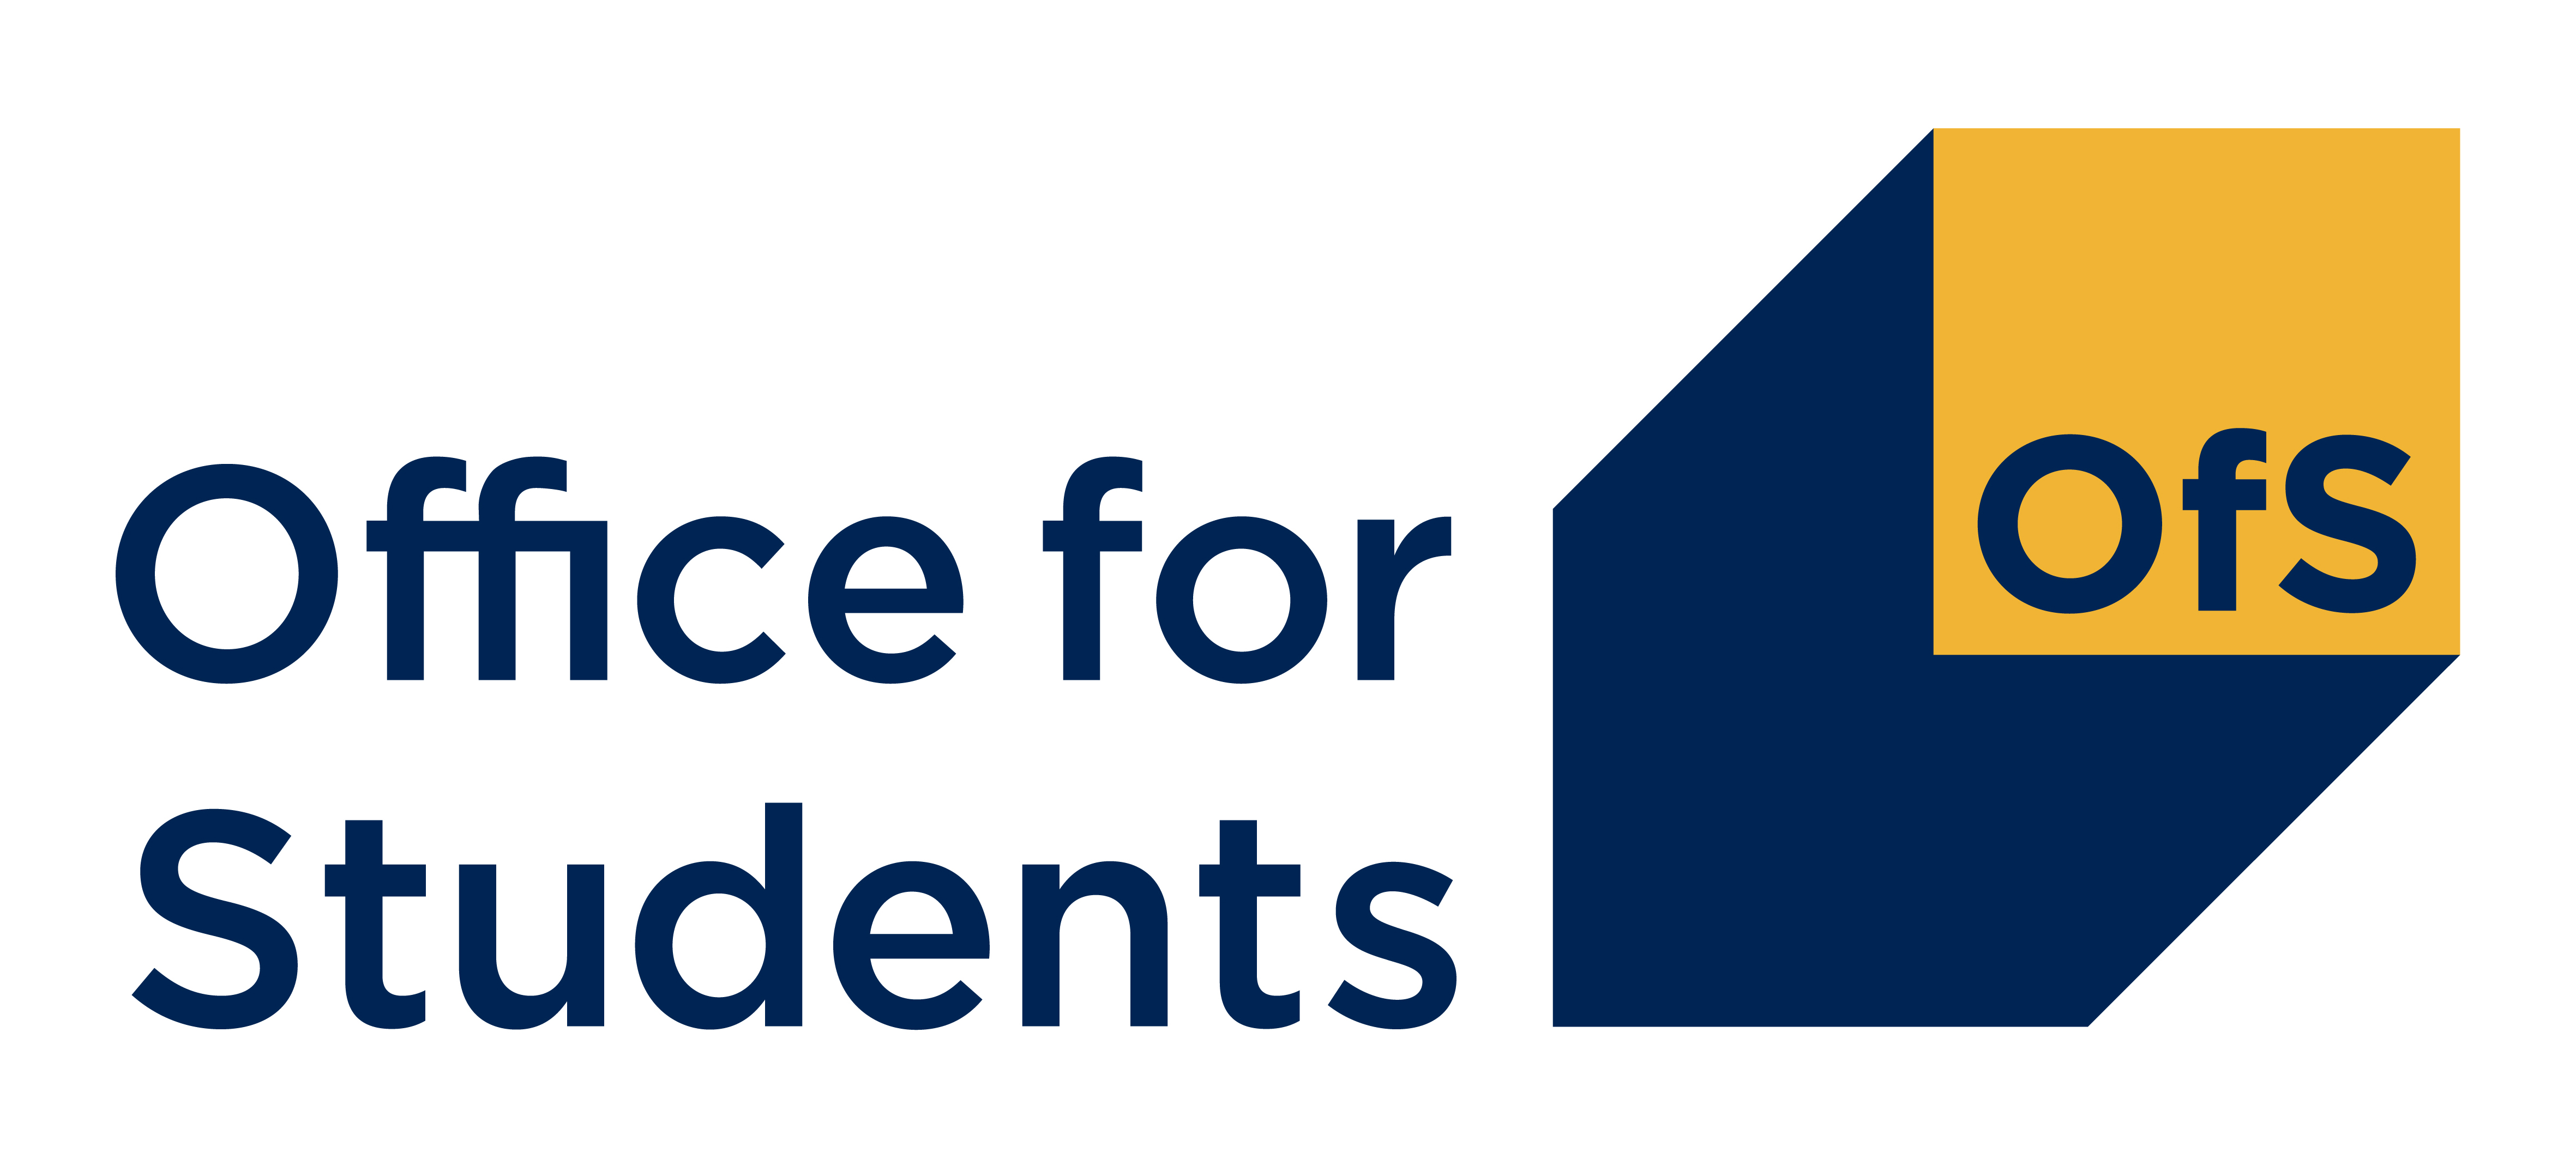 Office for students logo